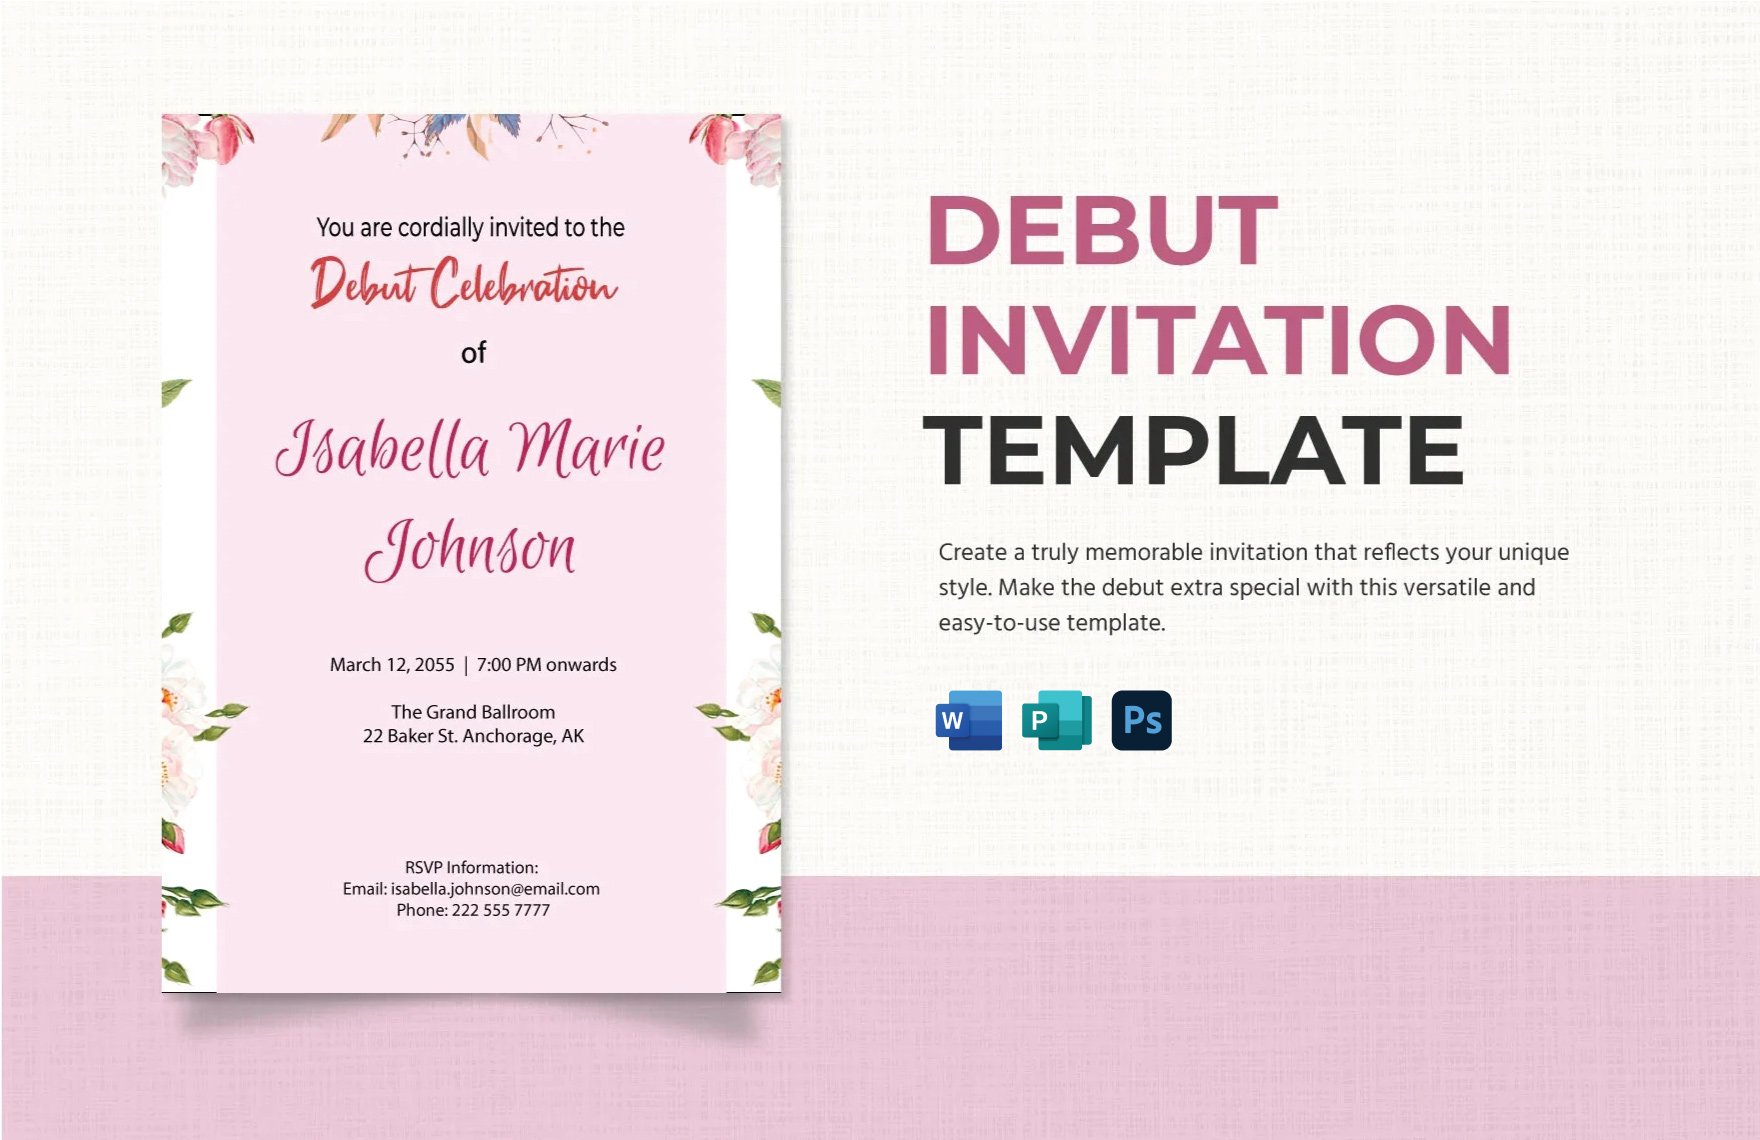 Debut Invitation Template in Word, PSD, Apple Pages, Publisher